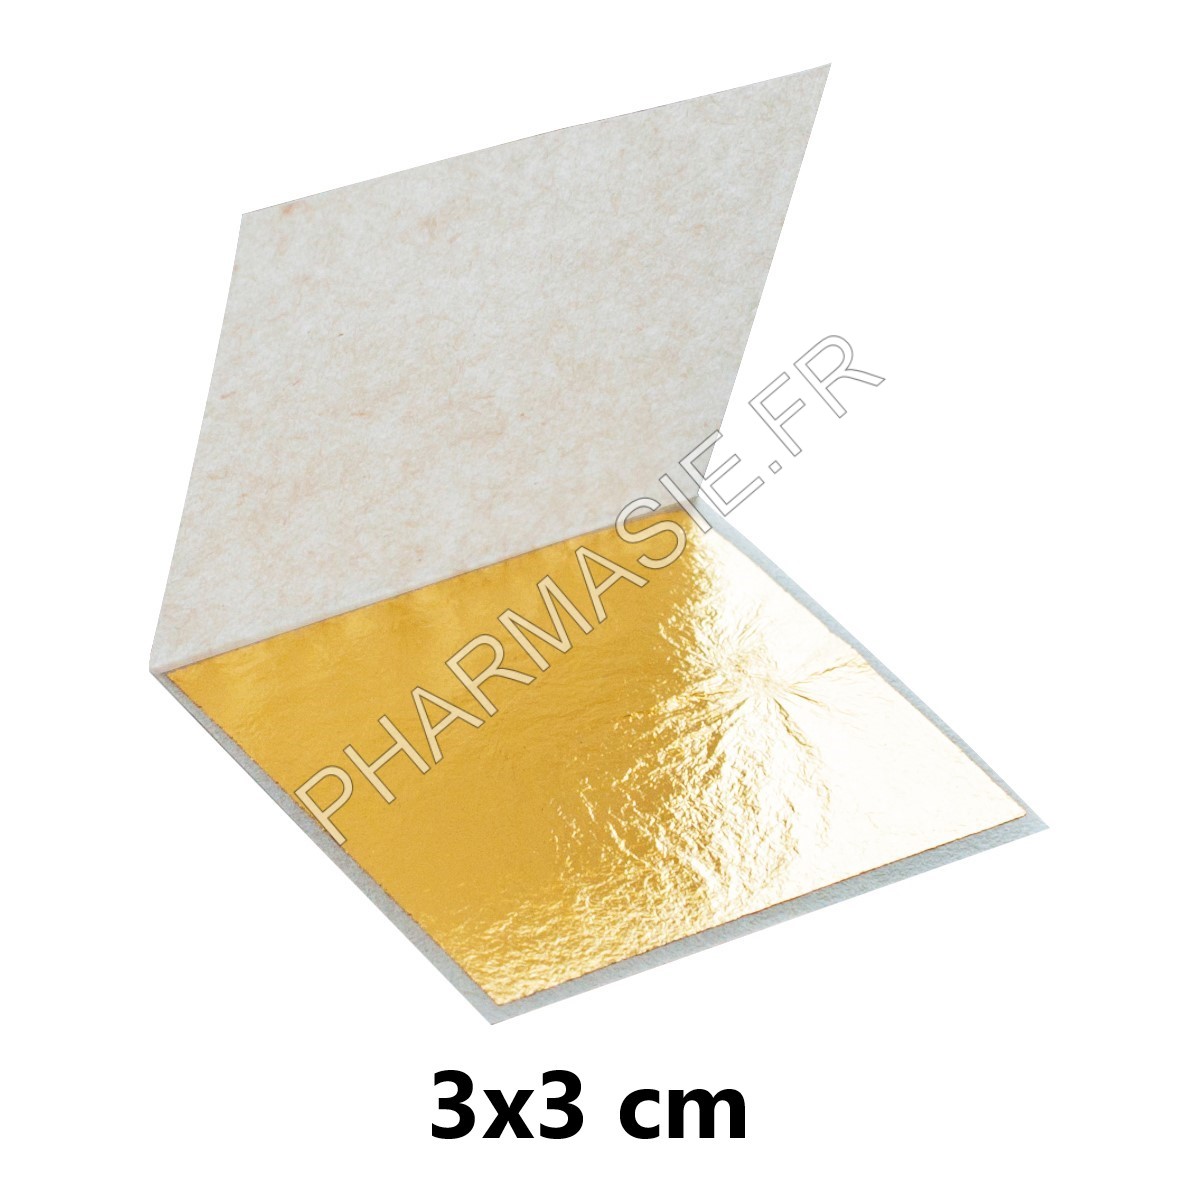 Pack of 100 Real Gold Leaves in Pure 24k Gold - Size 3x3 cm